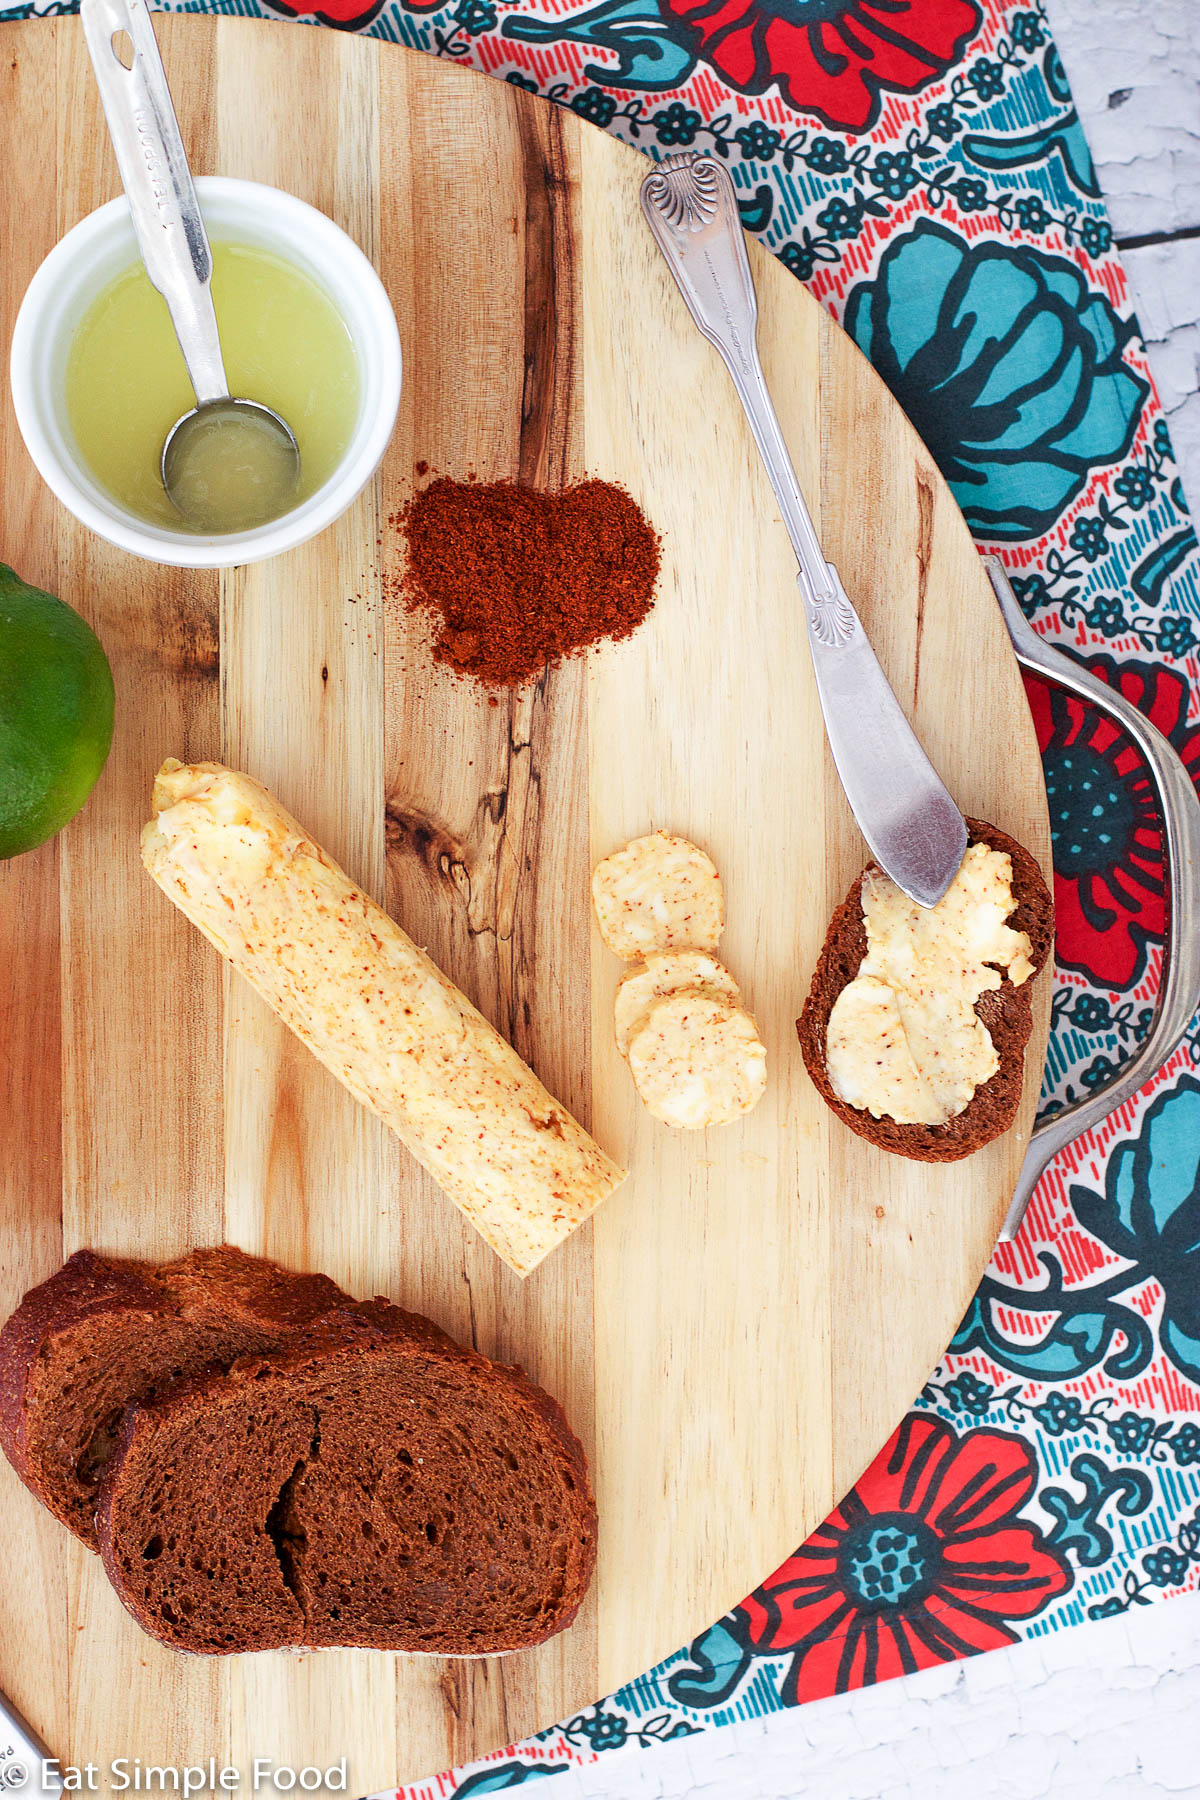 Chili Lime Compound Butter Roll on a wooden cutting board with a bowl of fresh lime juice with a teaspoon in it, fresh sliced bread, a lime, and ground chili powder with a butter knife. horizontal view